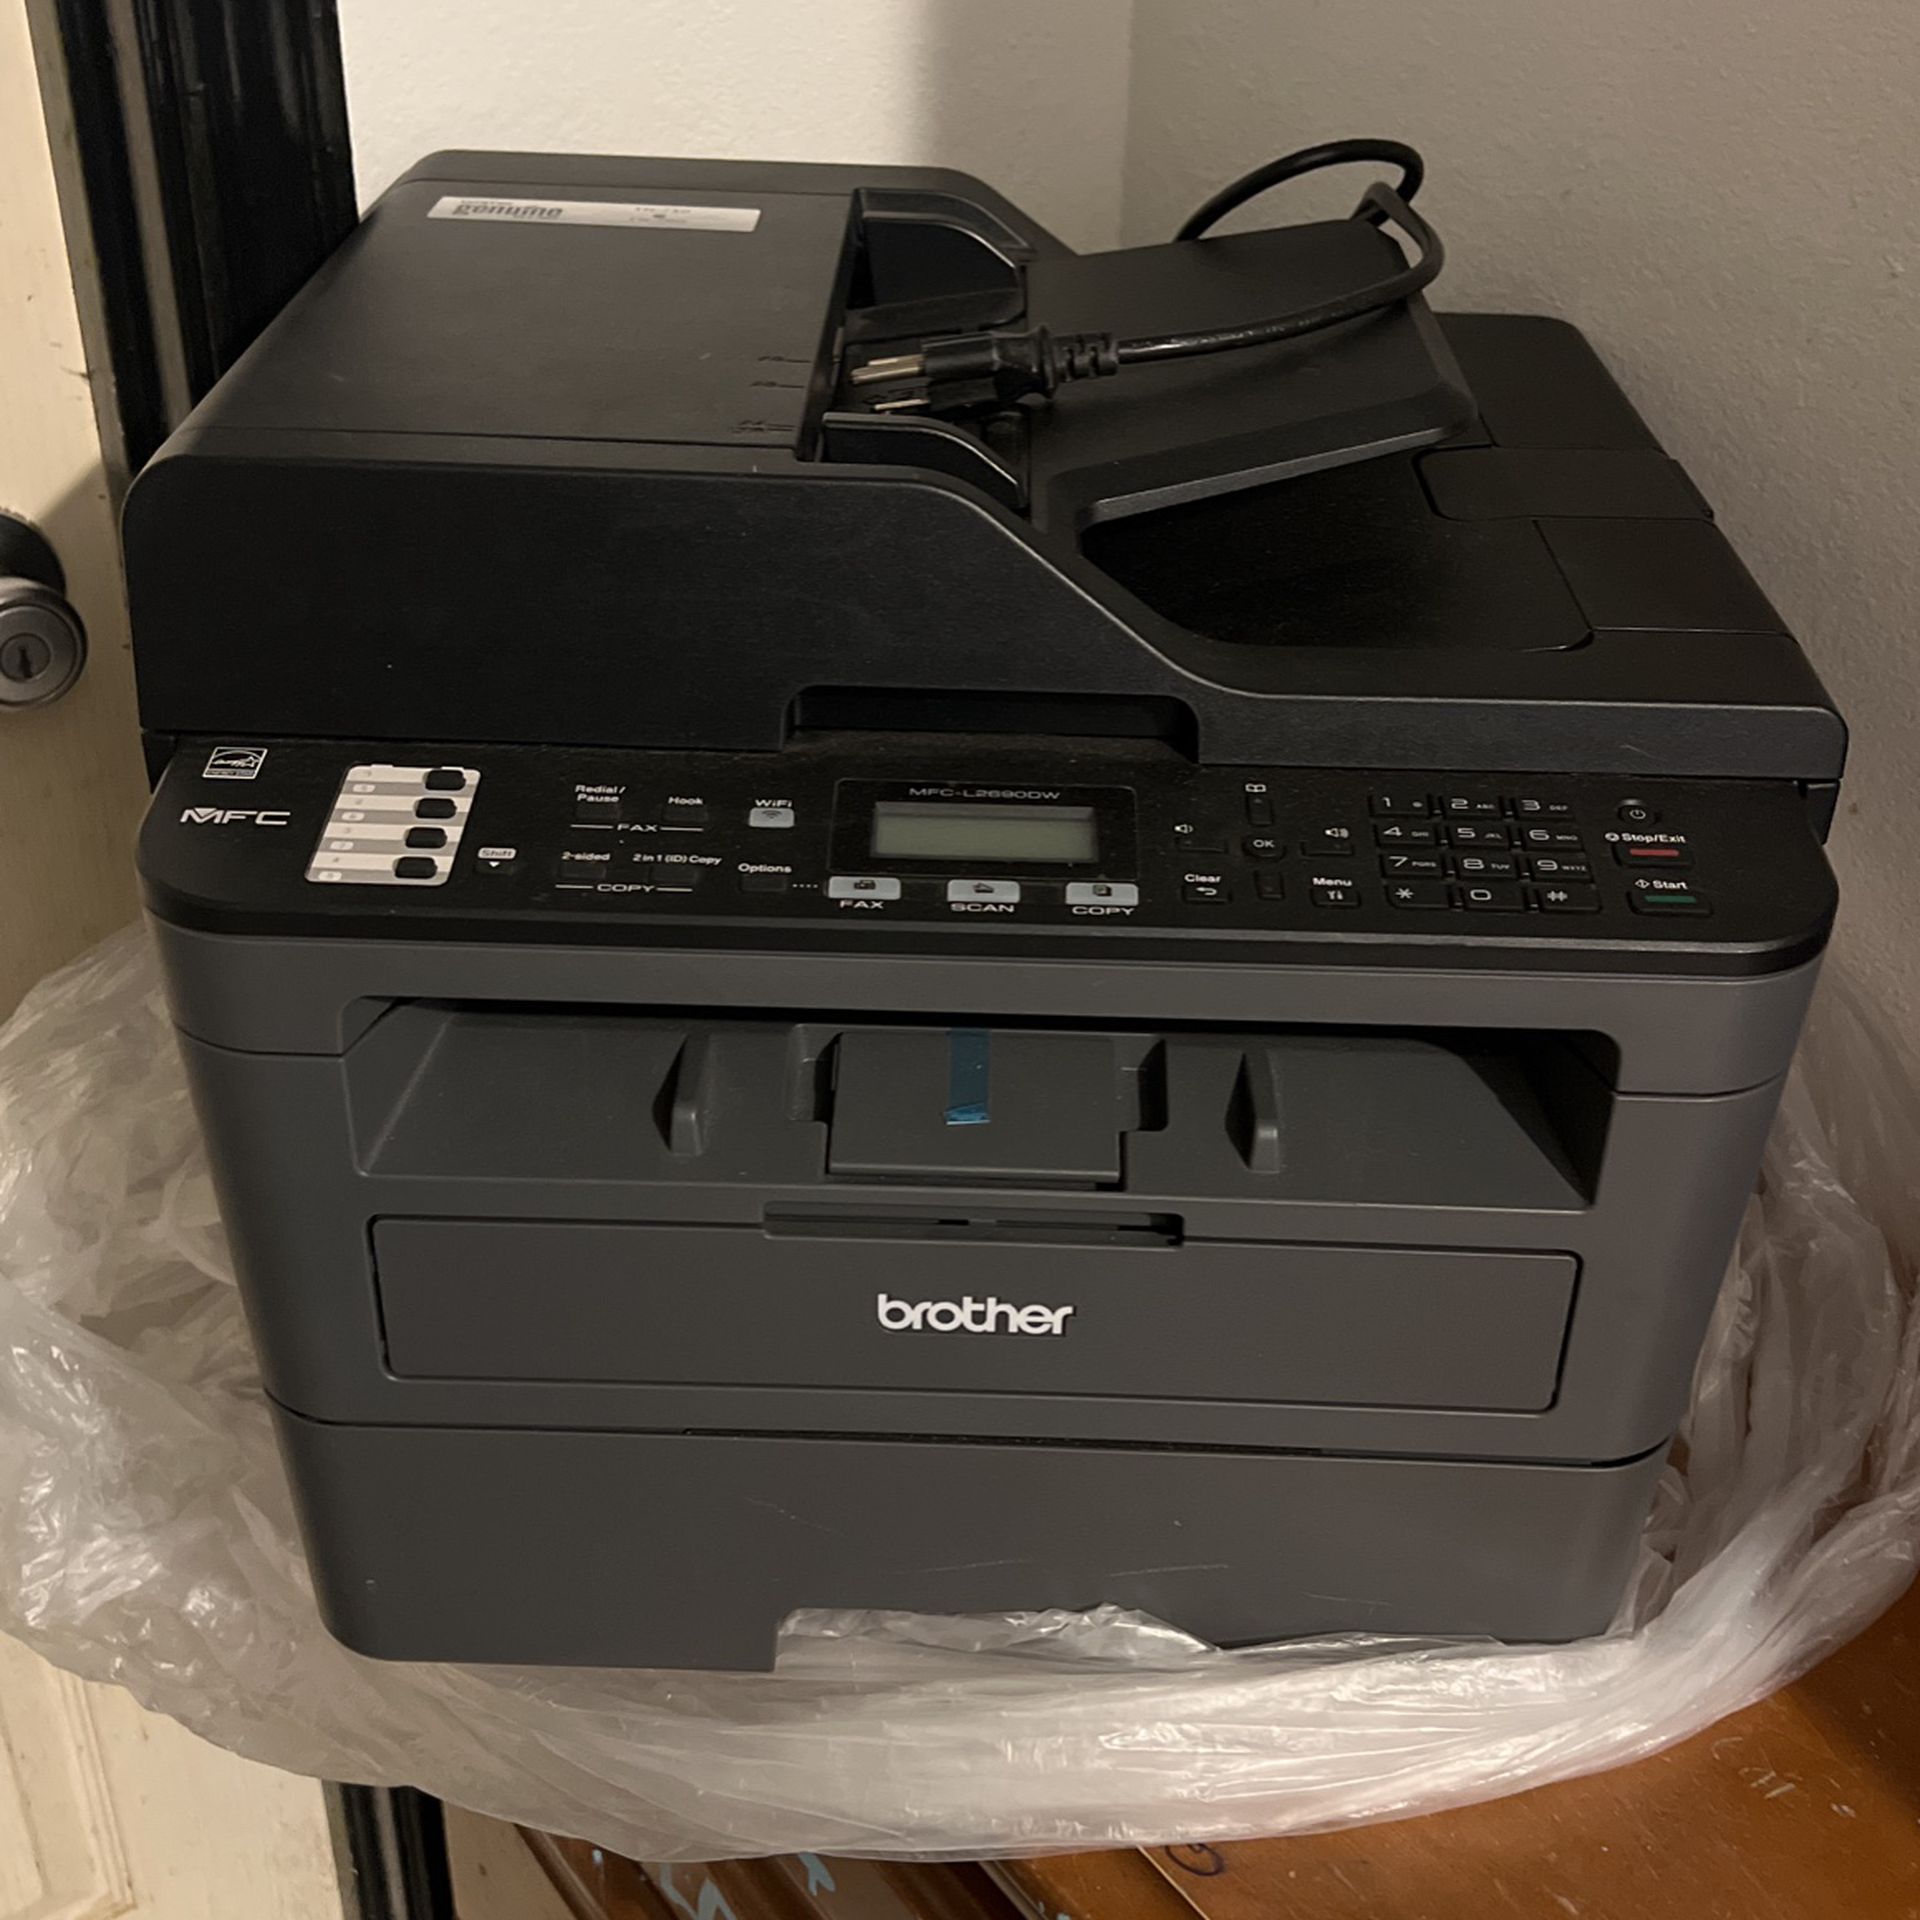 Printer And Fax